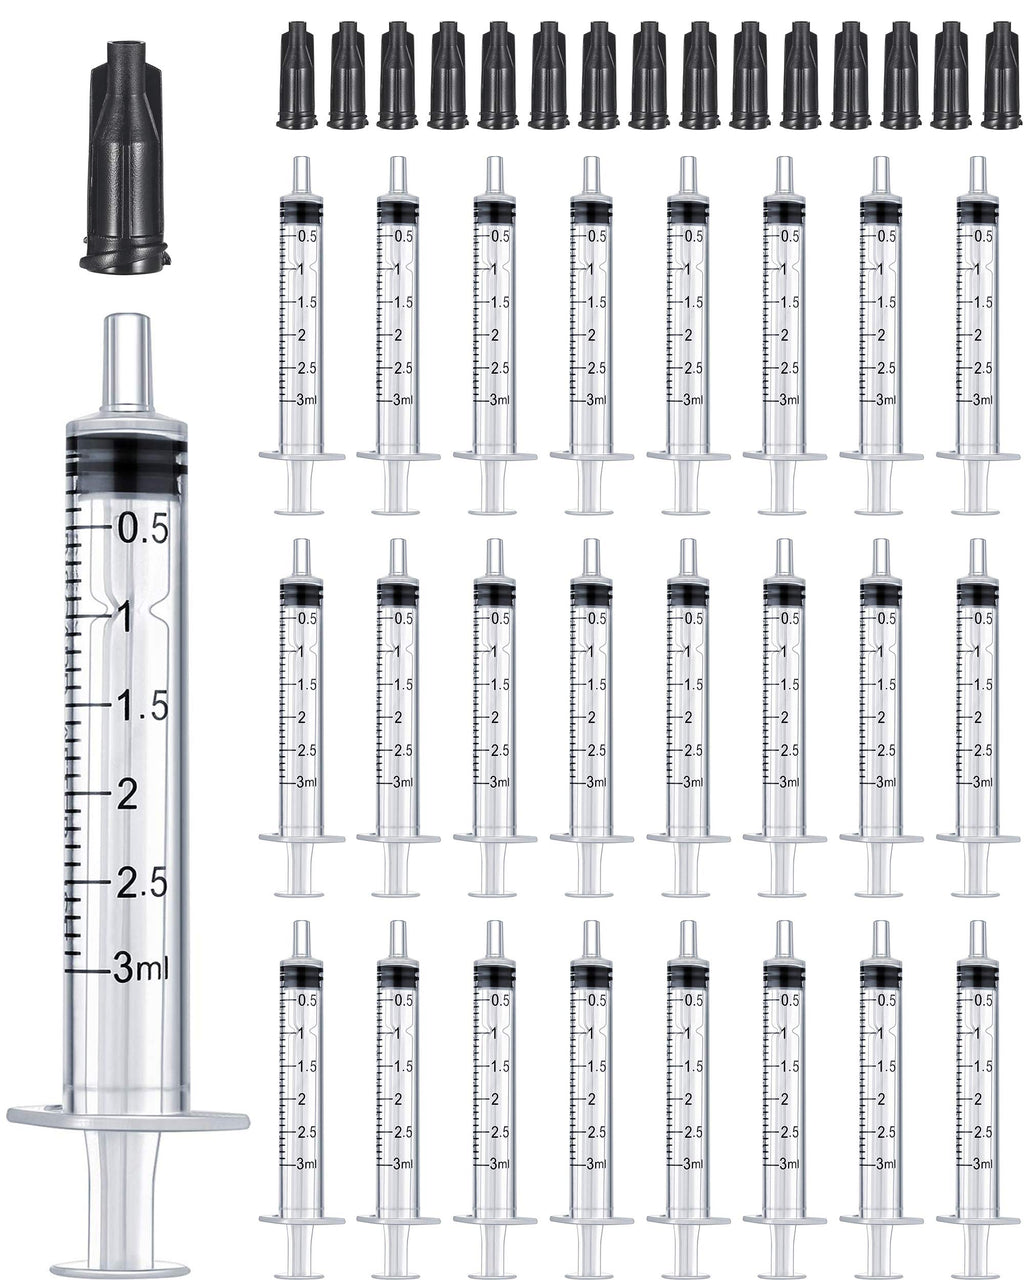  [AUSTRALIA] - 50 Pack 3ML Plastic Syringe Luer Slip with Cap, Great for Measuring, Refilling Watering and Pets Feeding, Non-Sterile (3ML)